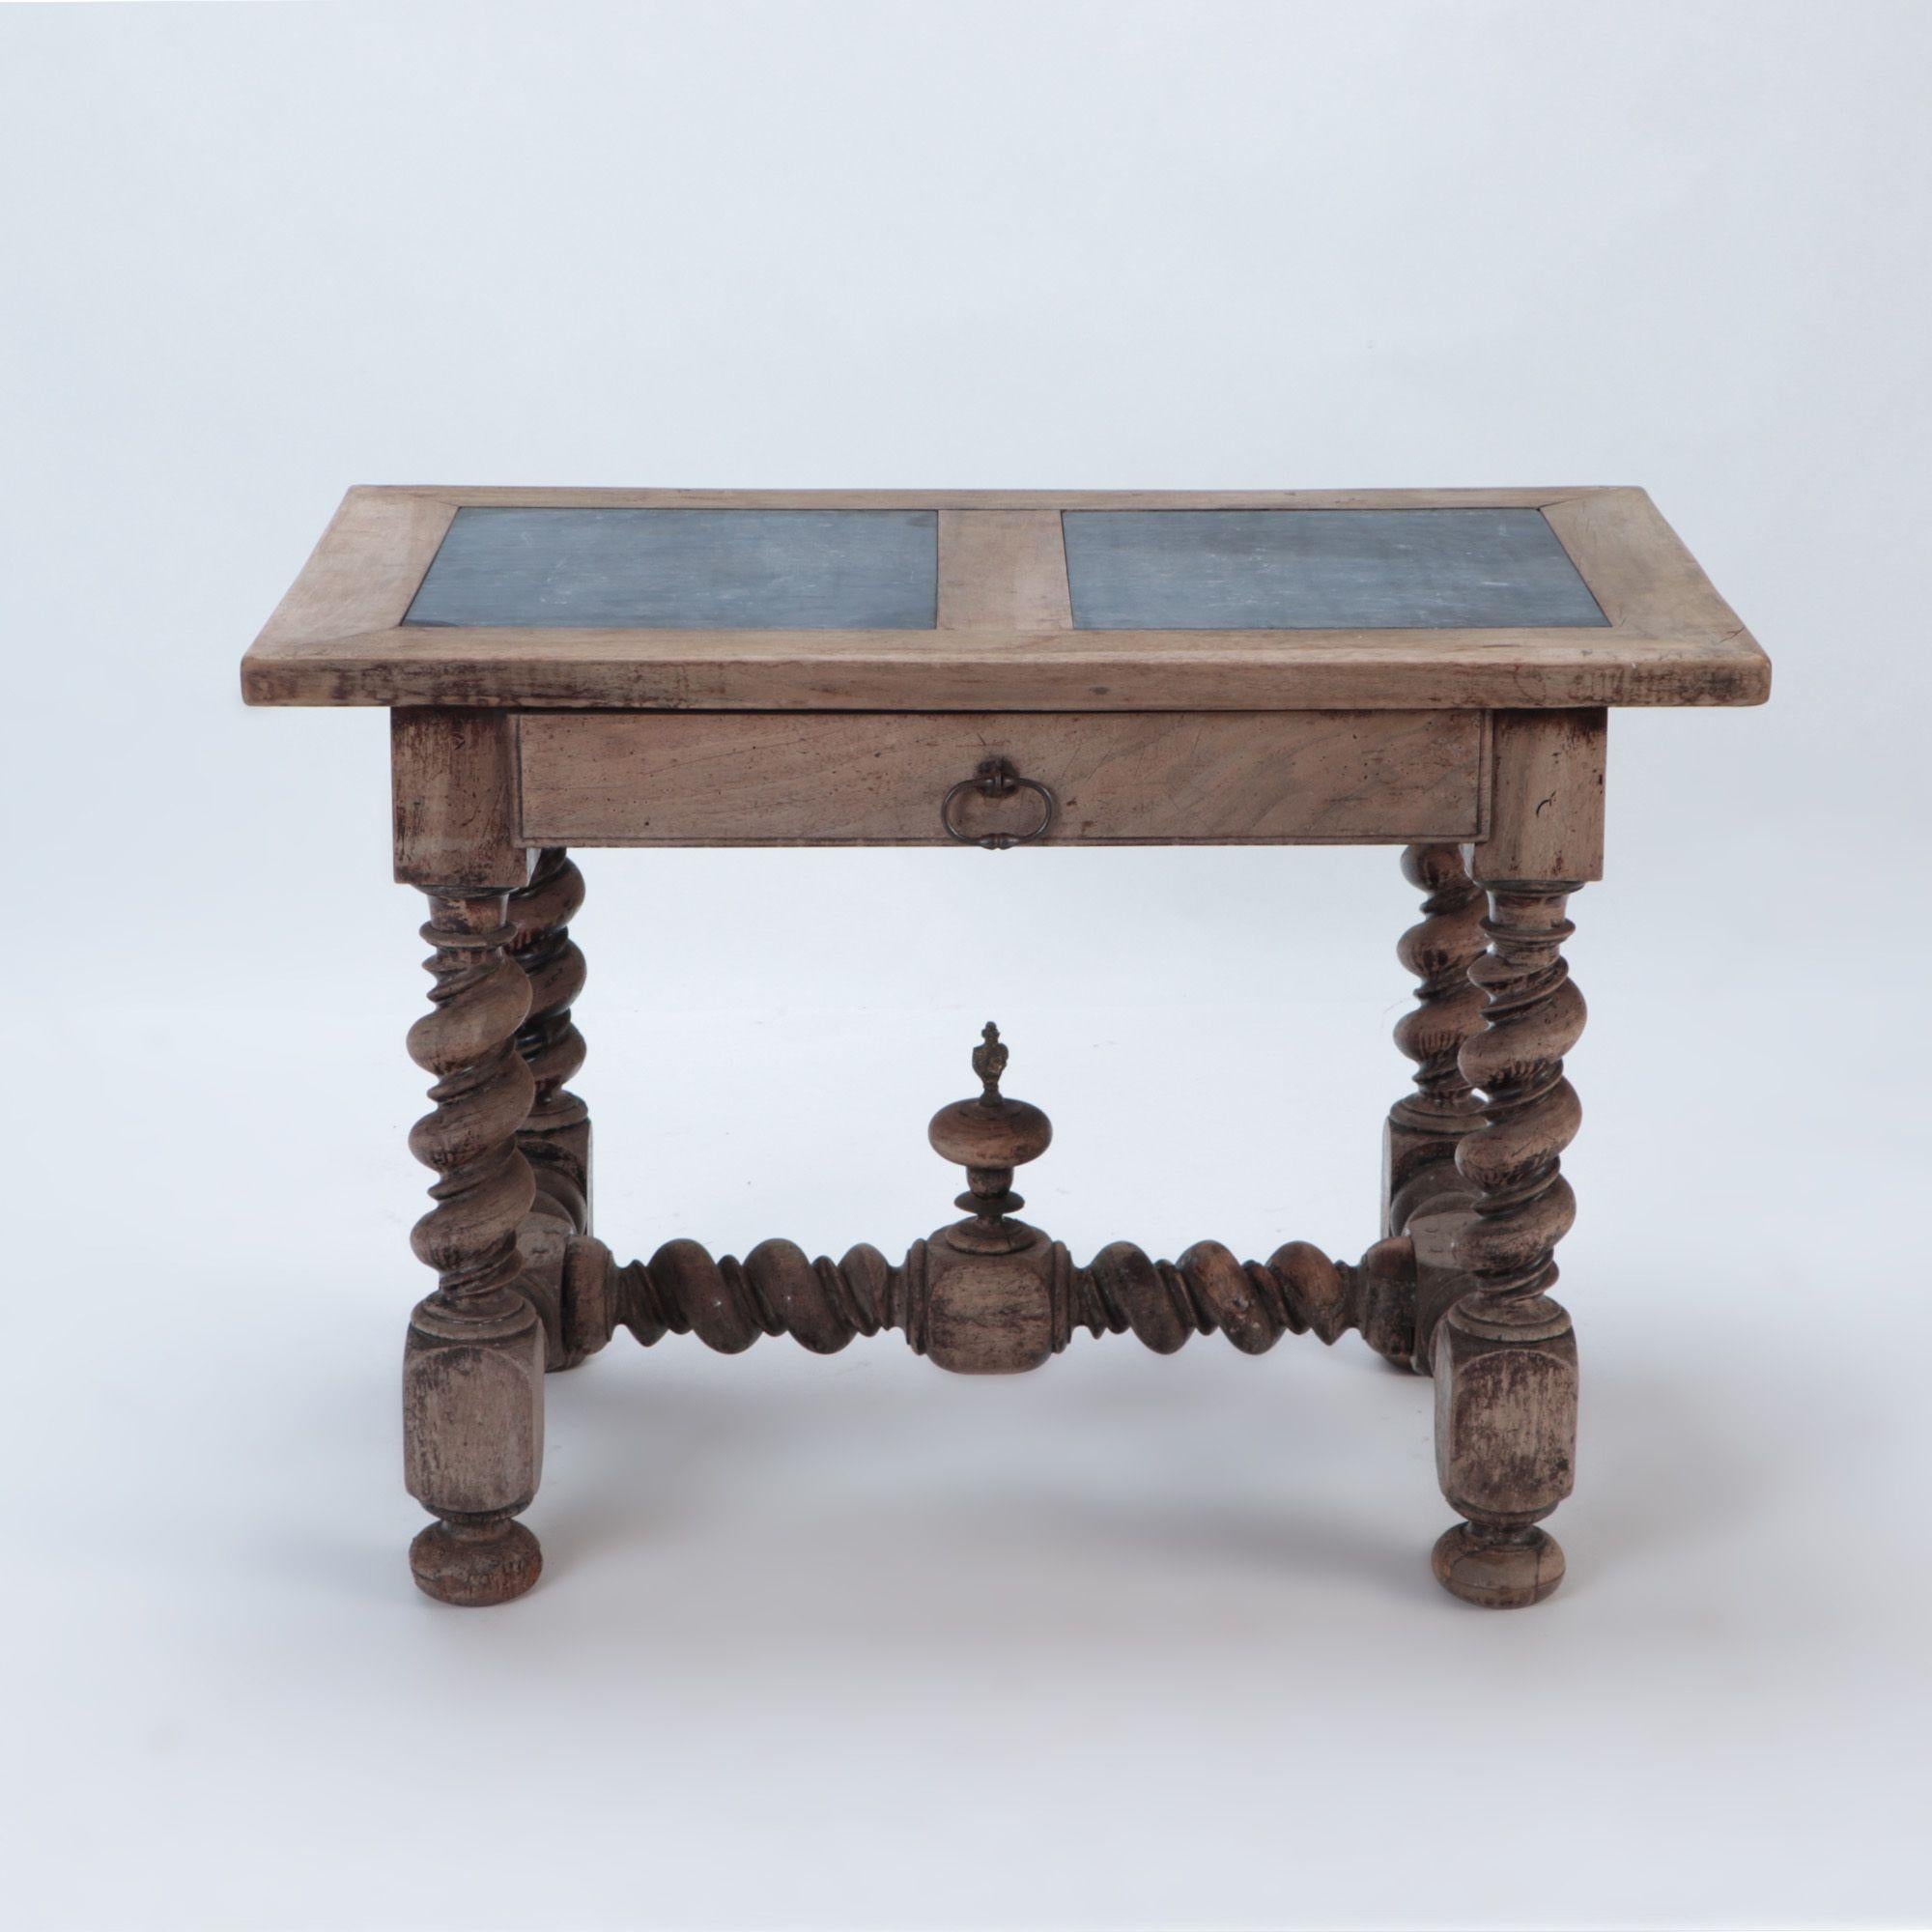 A French Antique stone top walnut table with twisted legs, circa 1880.